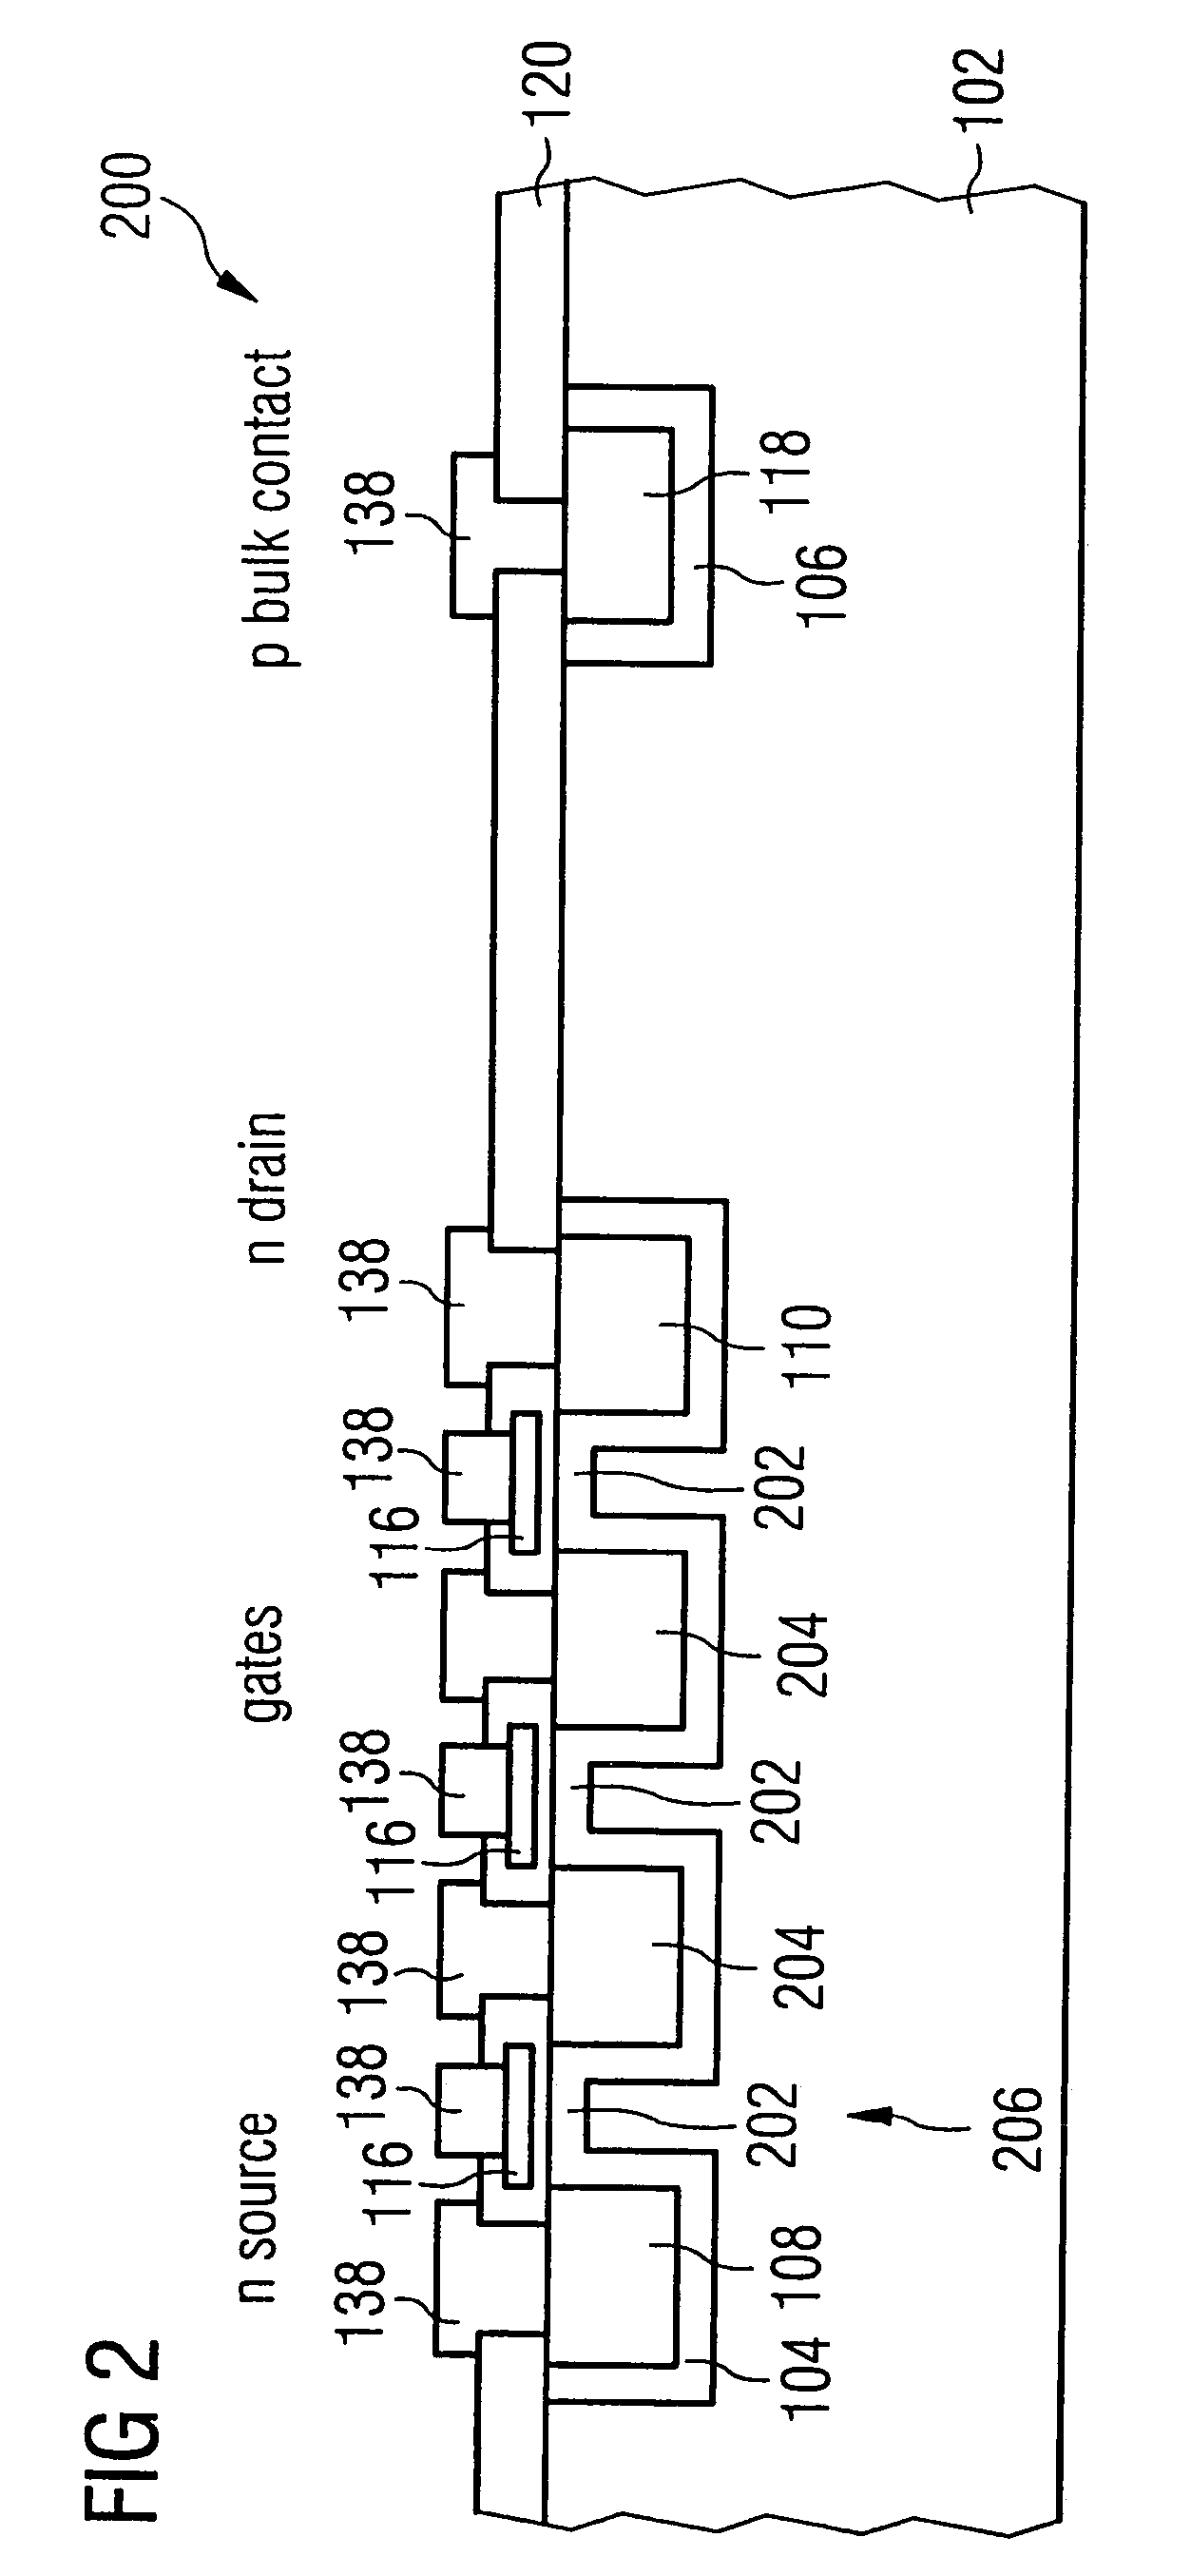 High-frequency switching transistor and high-frequency circuit